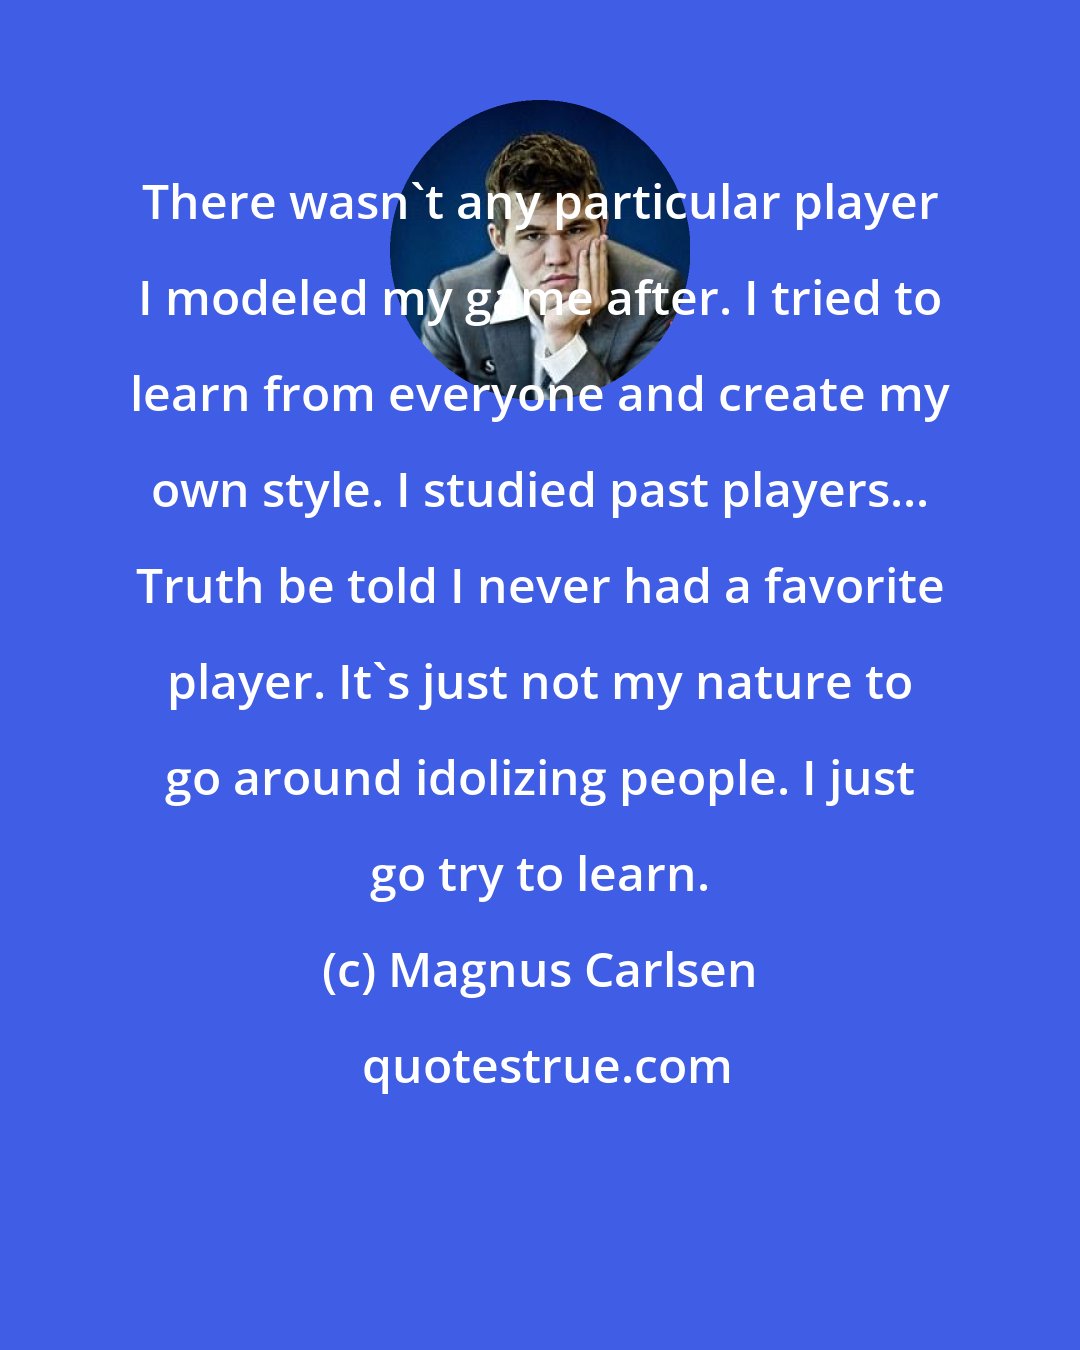 Magnus Carlsen: There wasn't any particular player I modeled my game after. I tried to learn from everyone and create my own style. I studied past players... Truth be told I never had a favorite player. It's just not my nature to go around idolizing people. I just go try to learn.